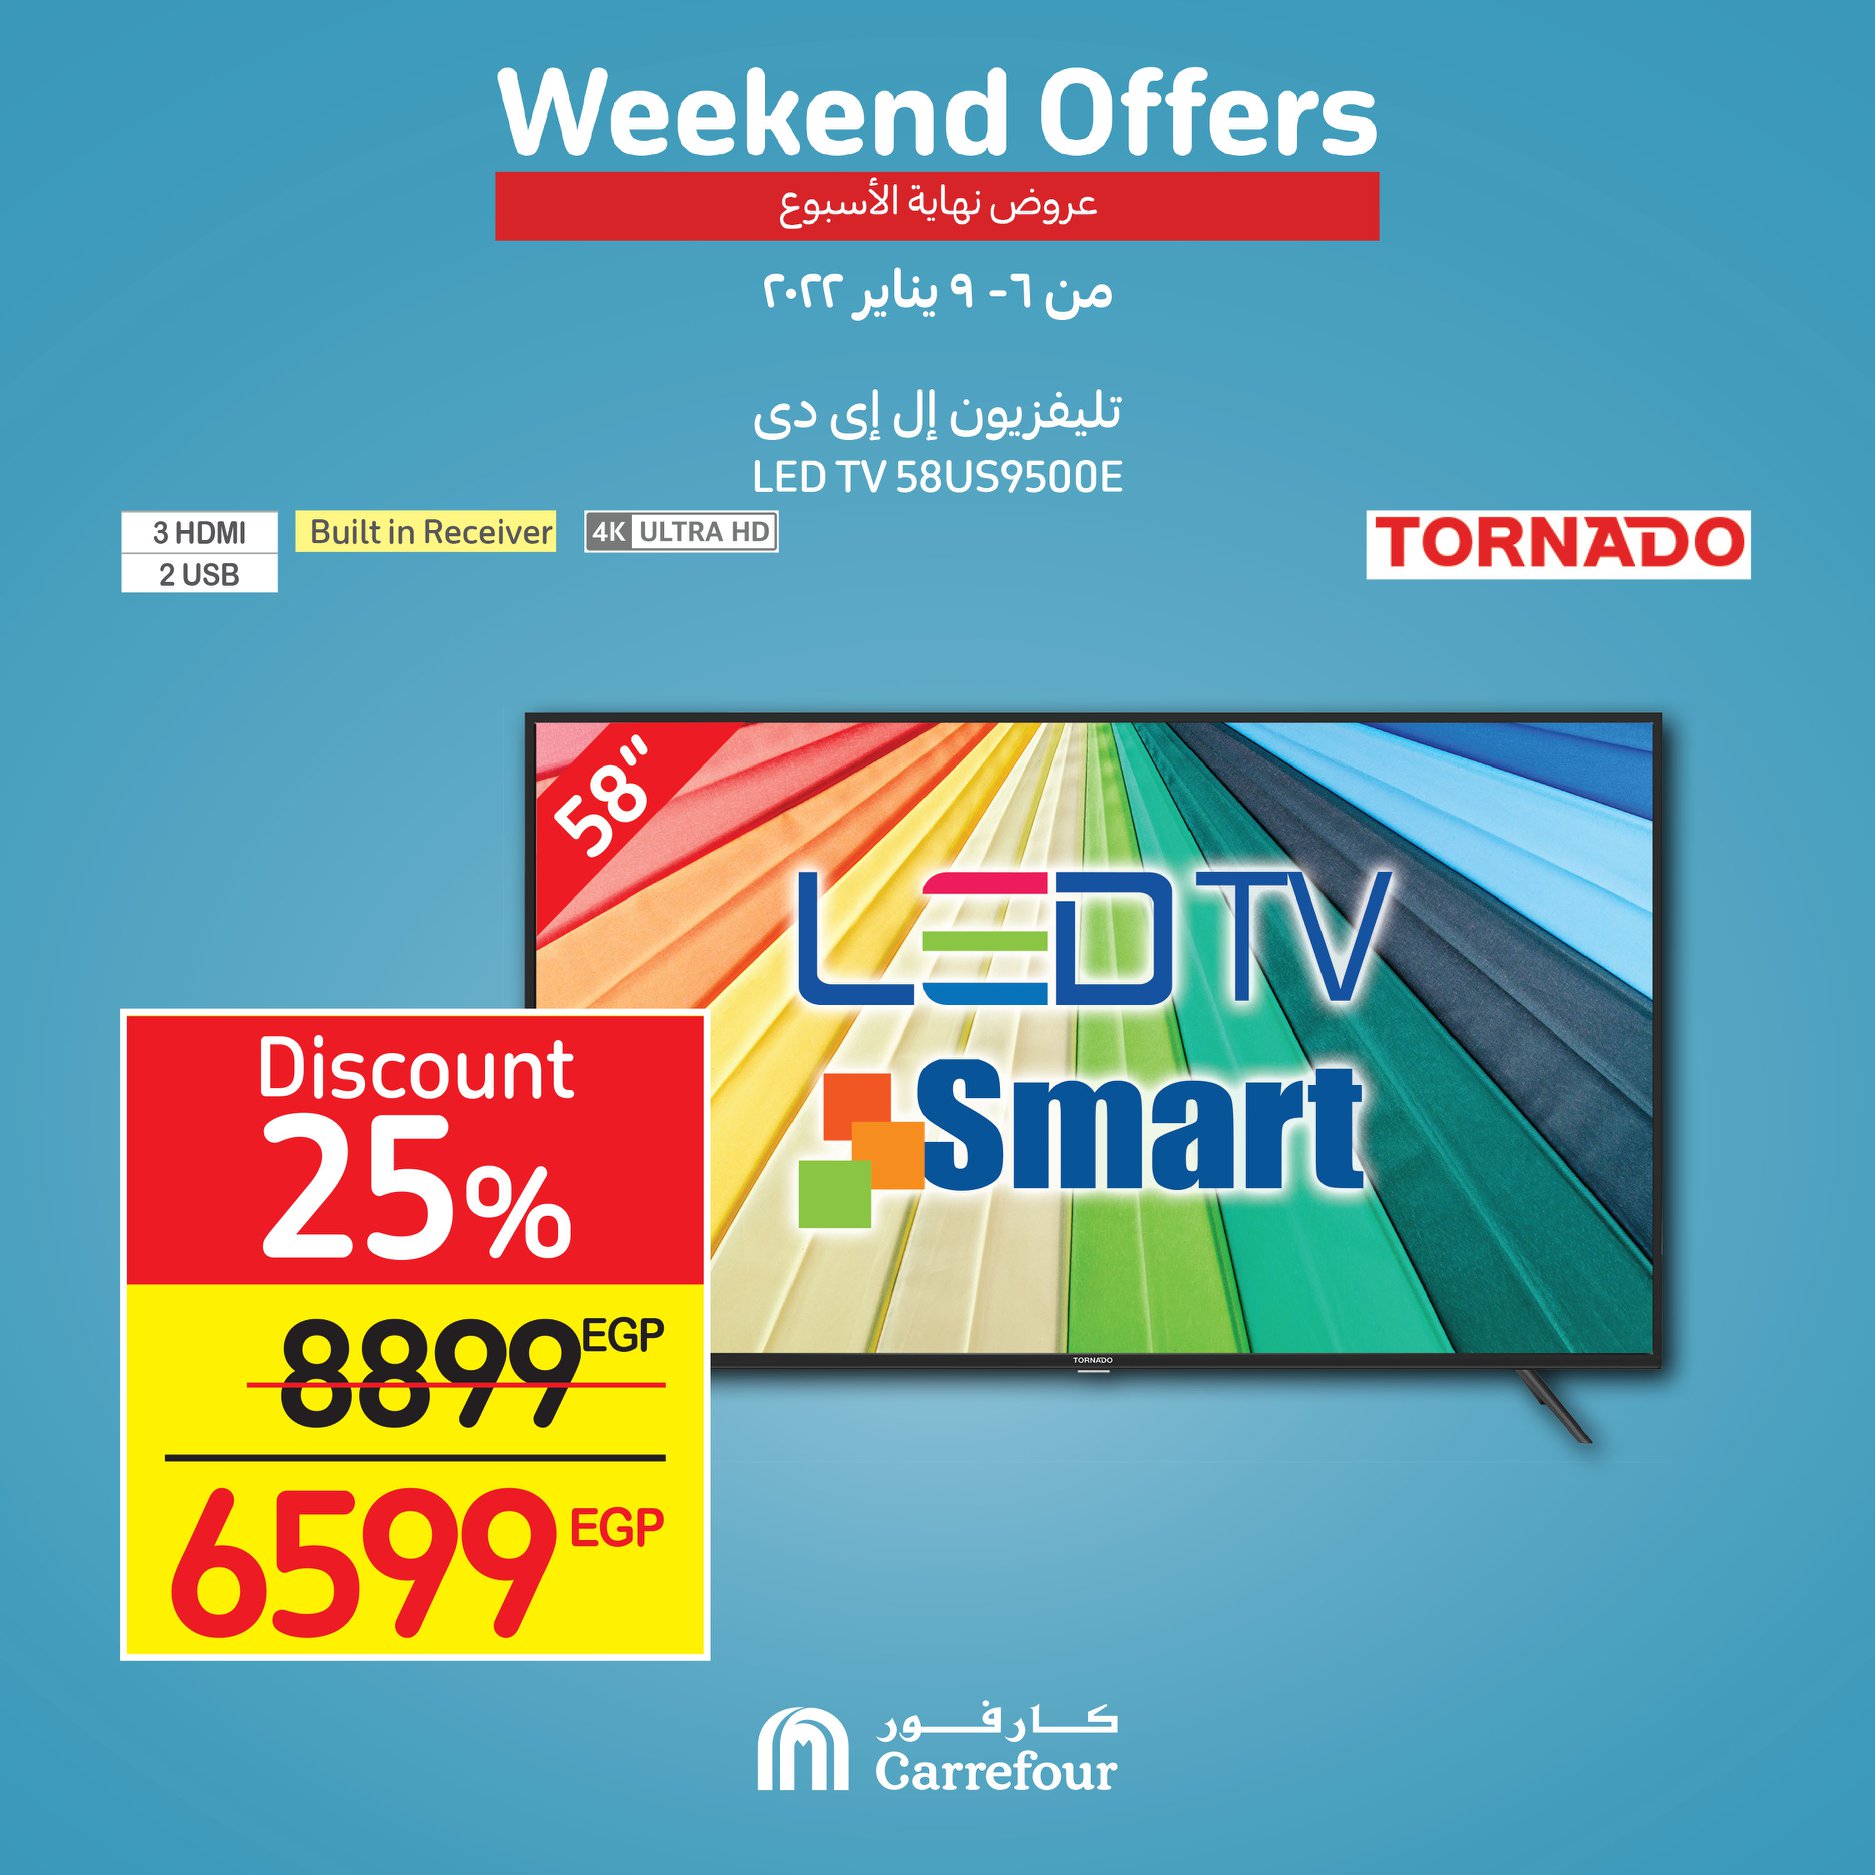 Now, the strongest offers and surprises from Carrefour, half-price discounts, at Weekend until January 16th, 6